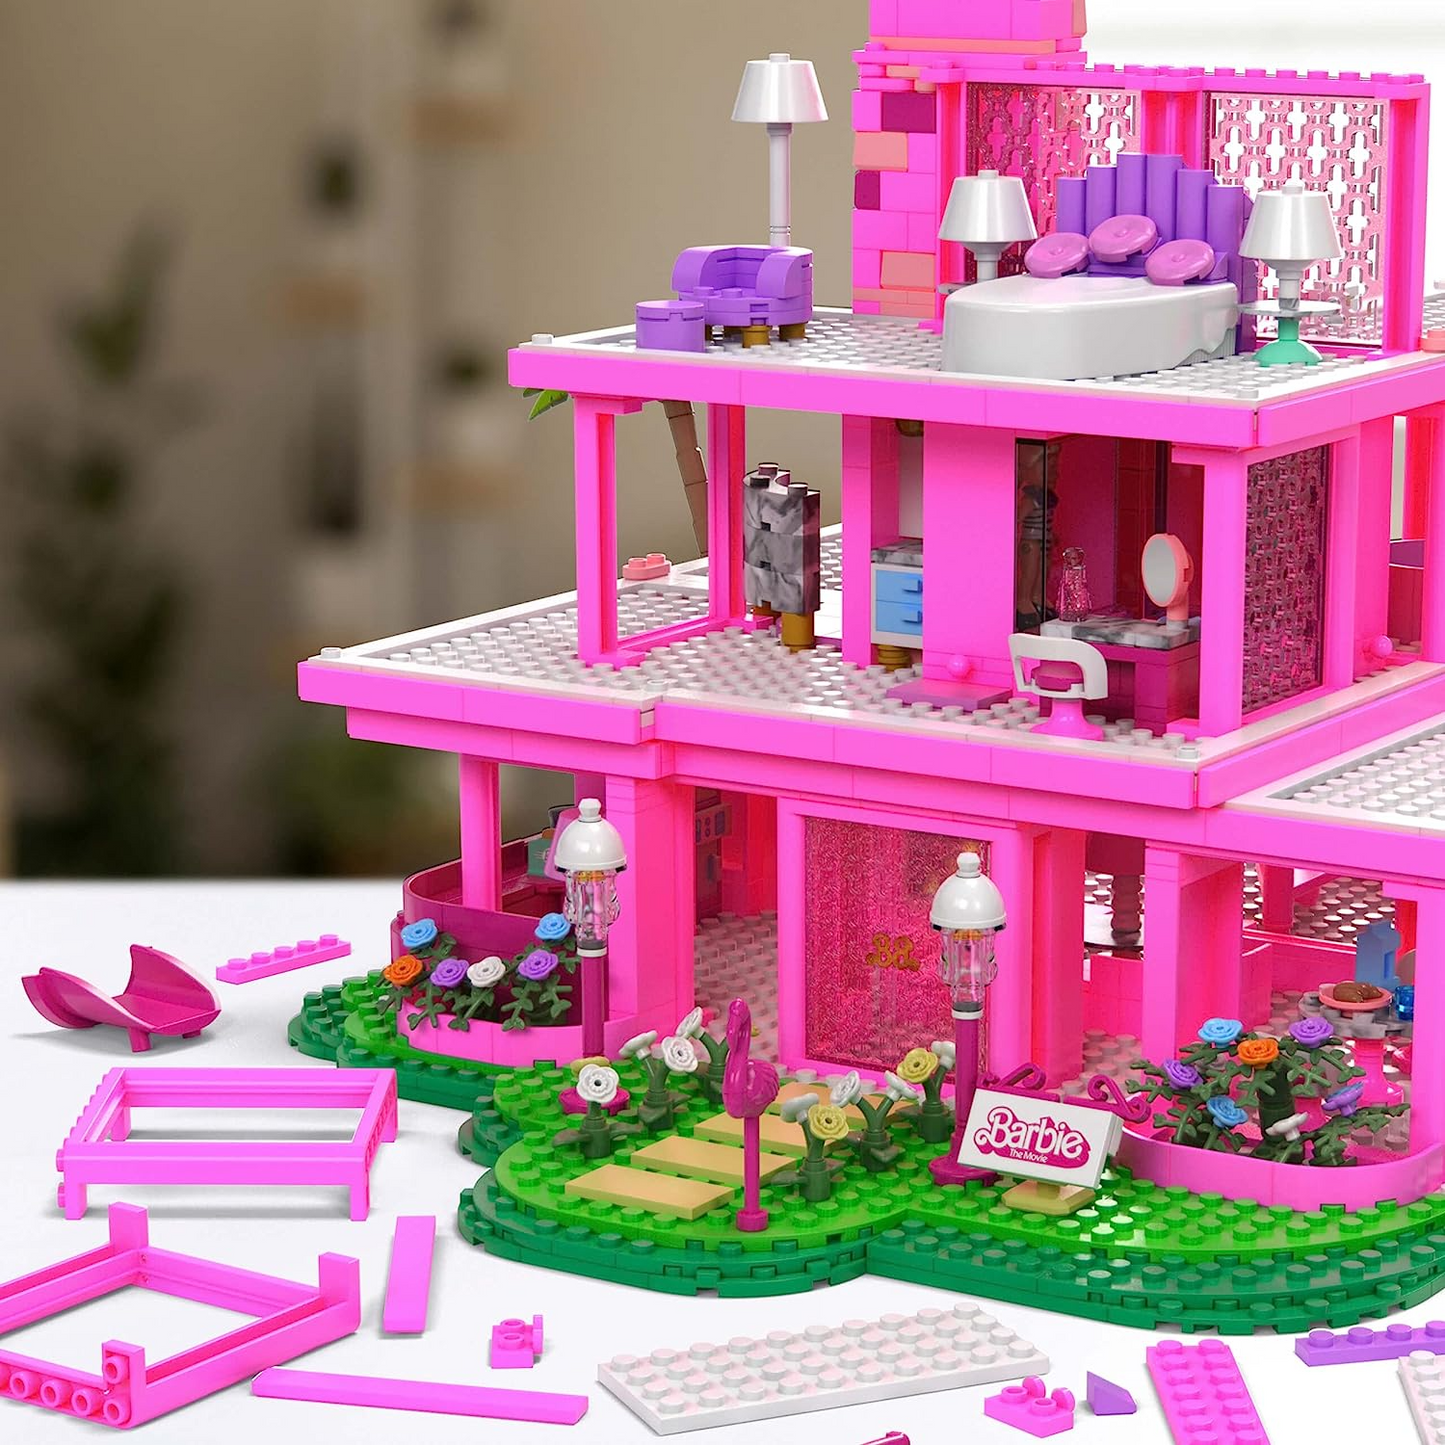 MEGA Barbie The Movie Building Toys for Adults, DreamHouse Replica with 1795 Pieces, Barbie and Ken Micro-Dolls and Accessories, for Collectors, HPH26